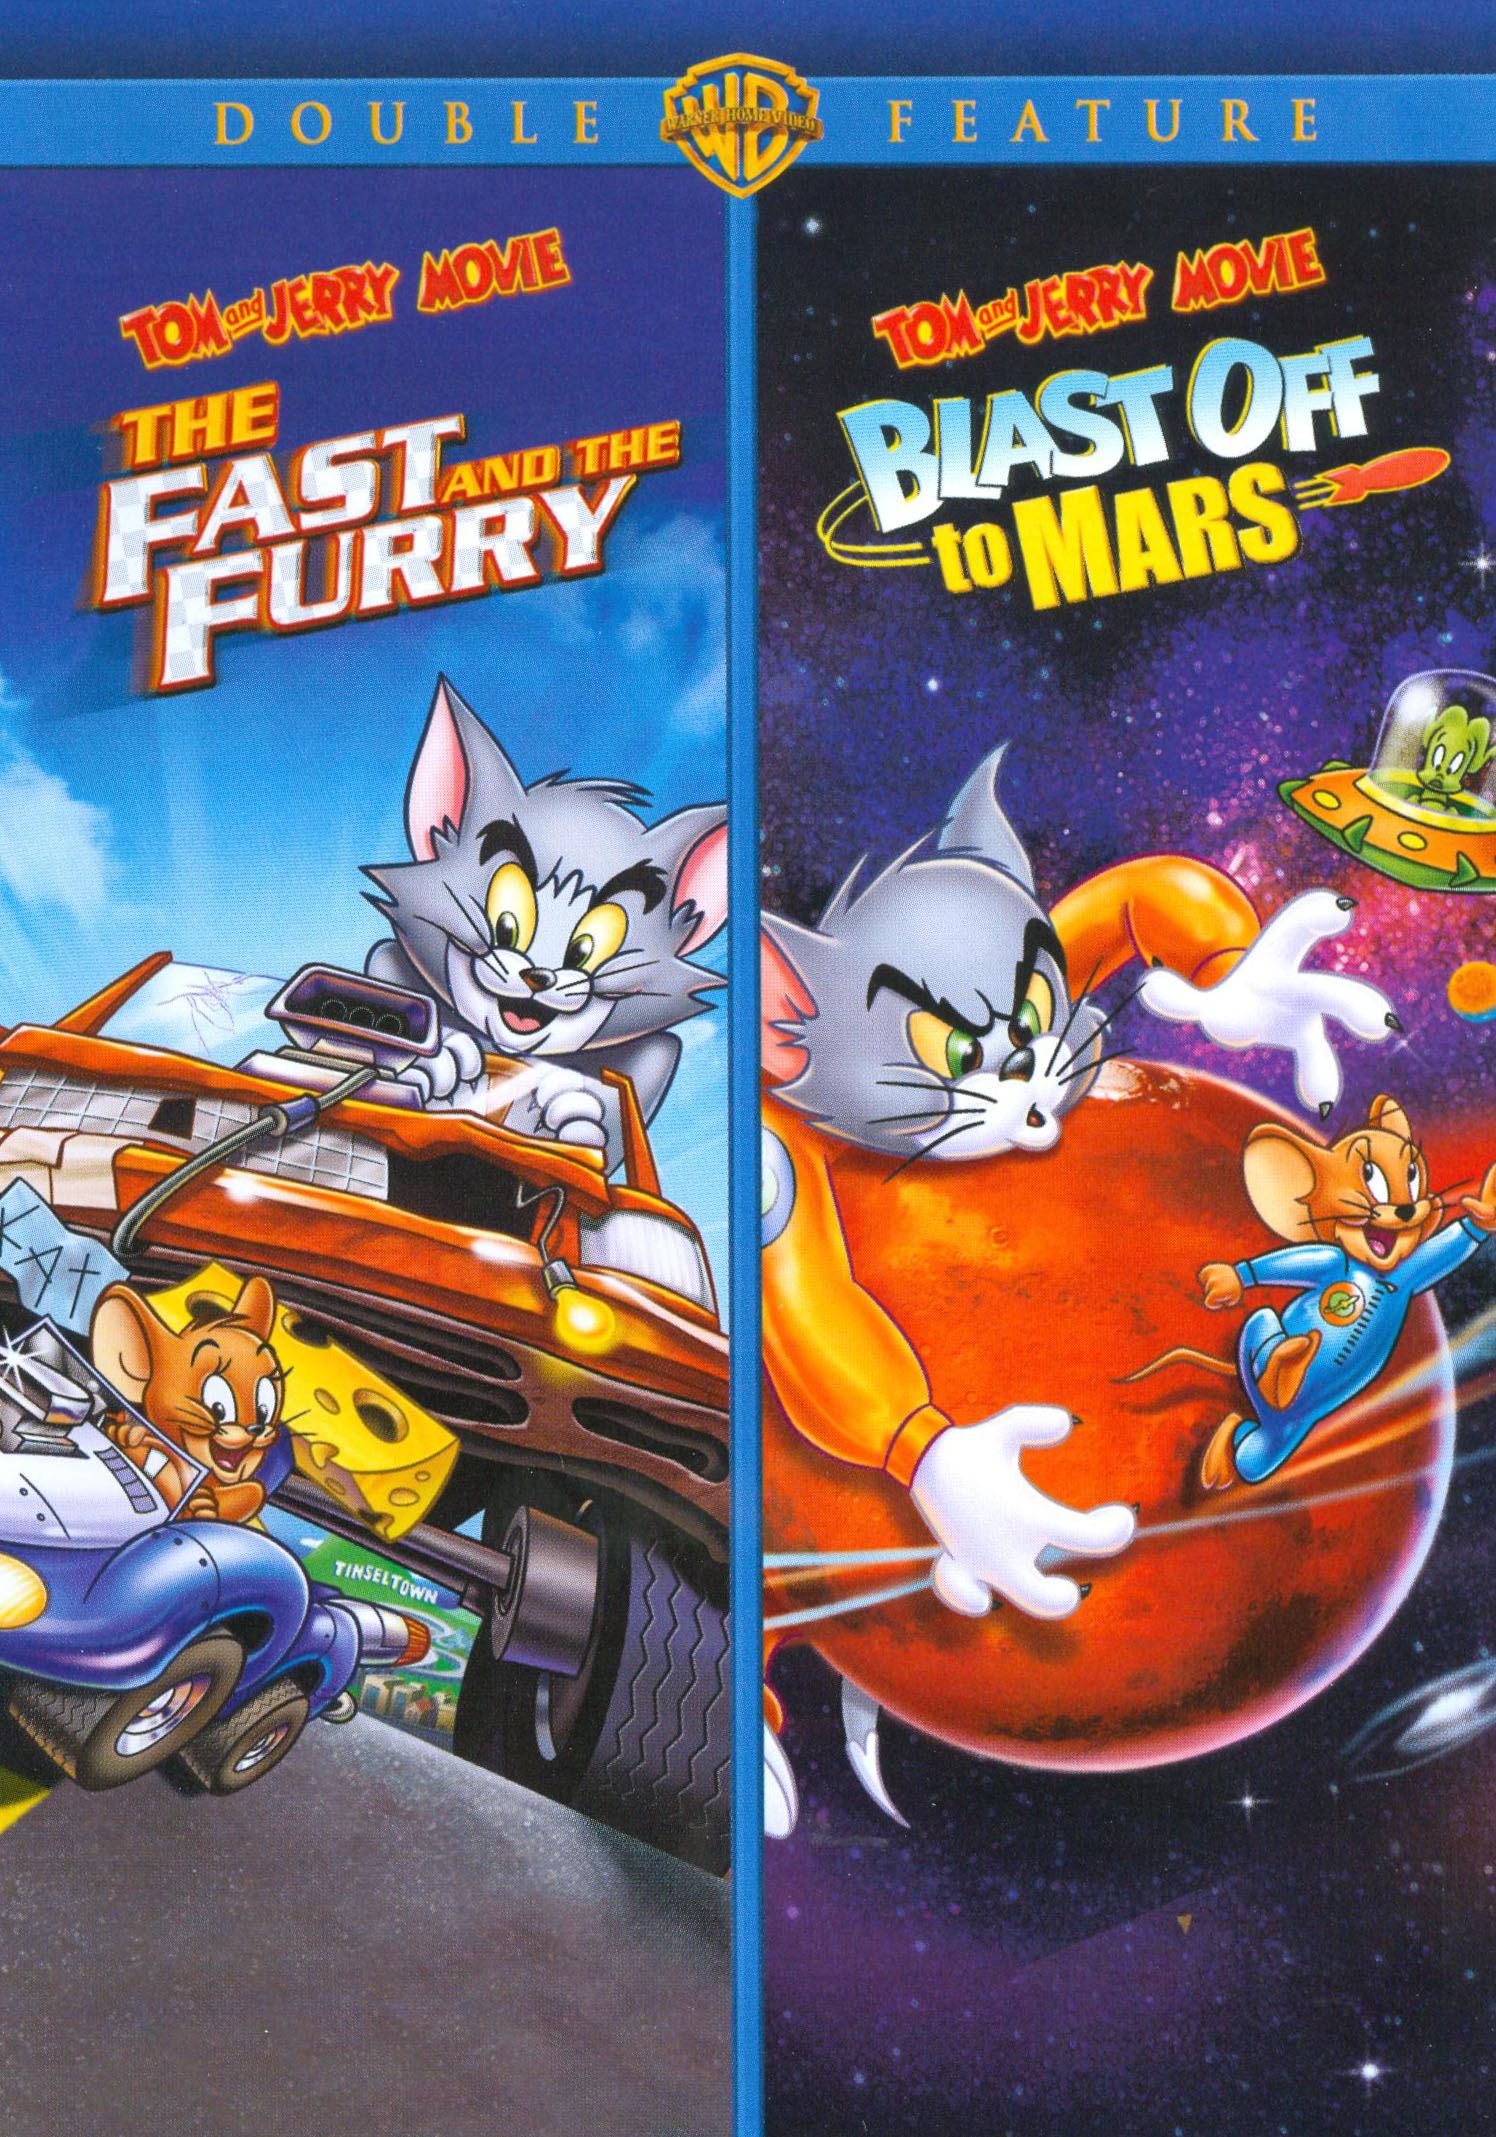 Tom and Jerry: The Fast and the Furry/Blast off to Mars DVD - Bes...